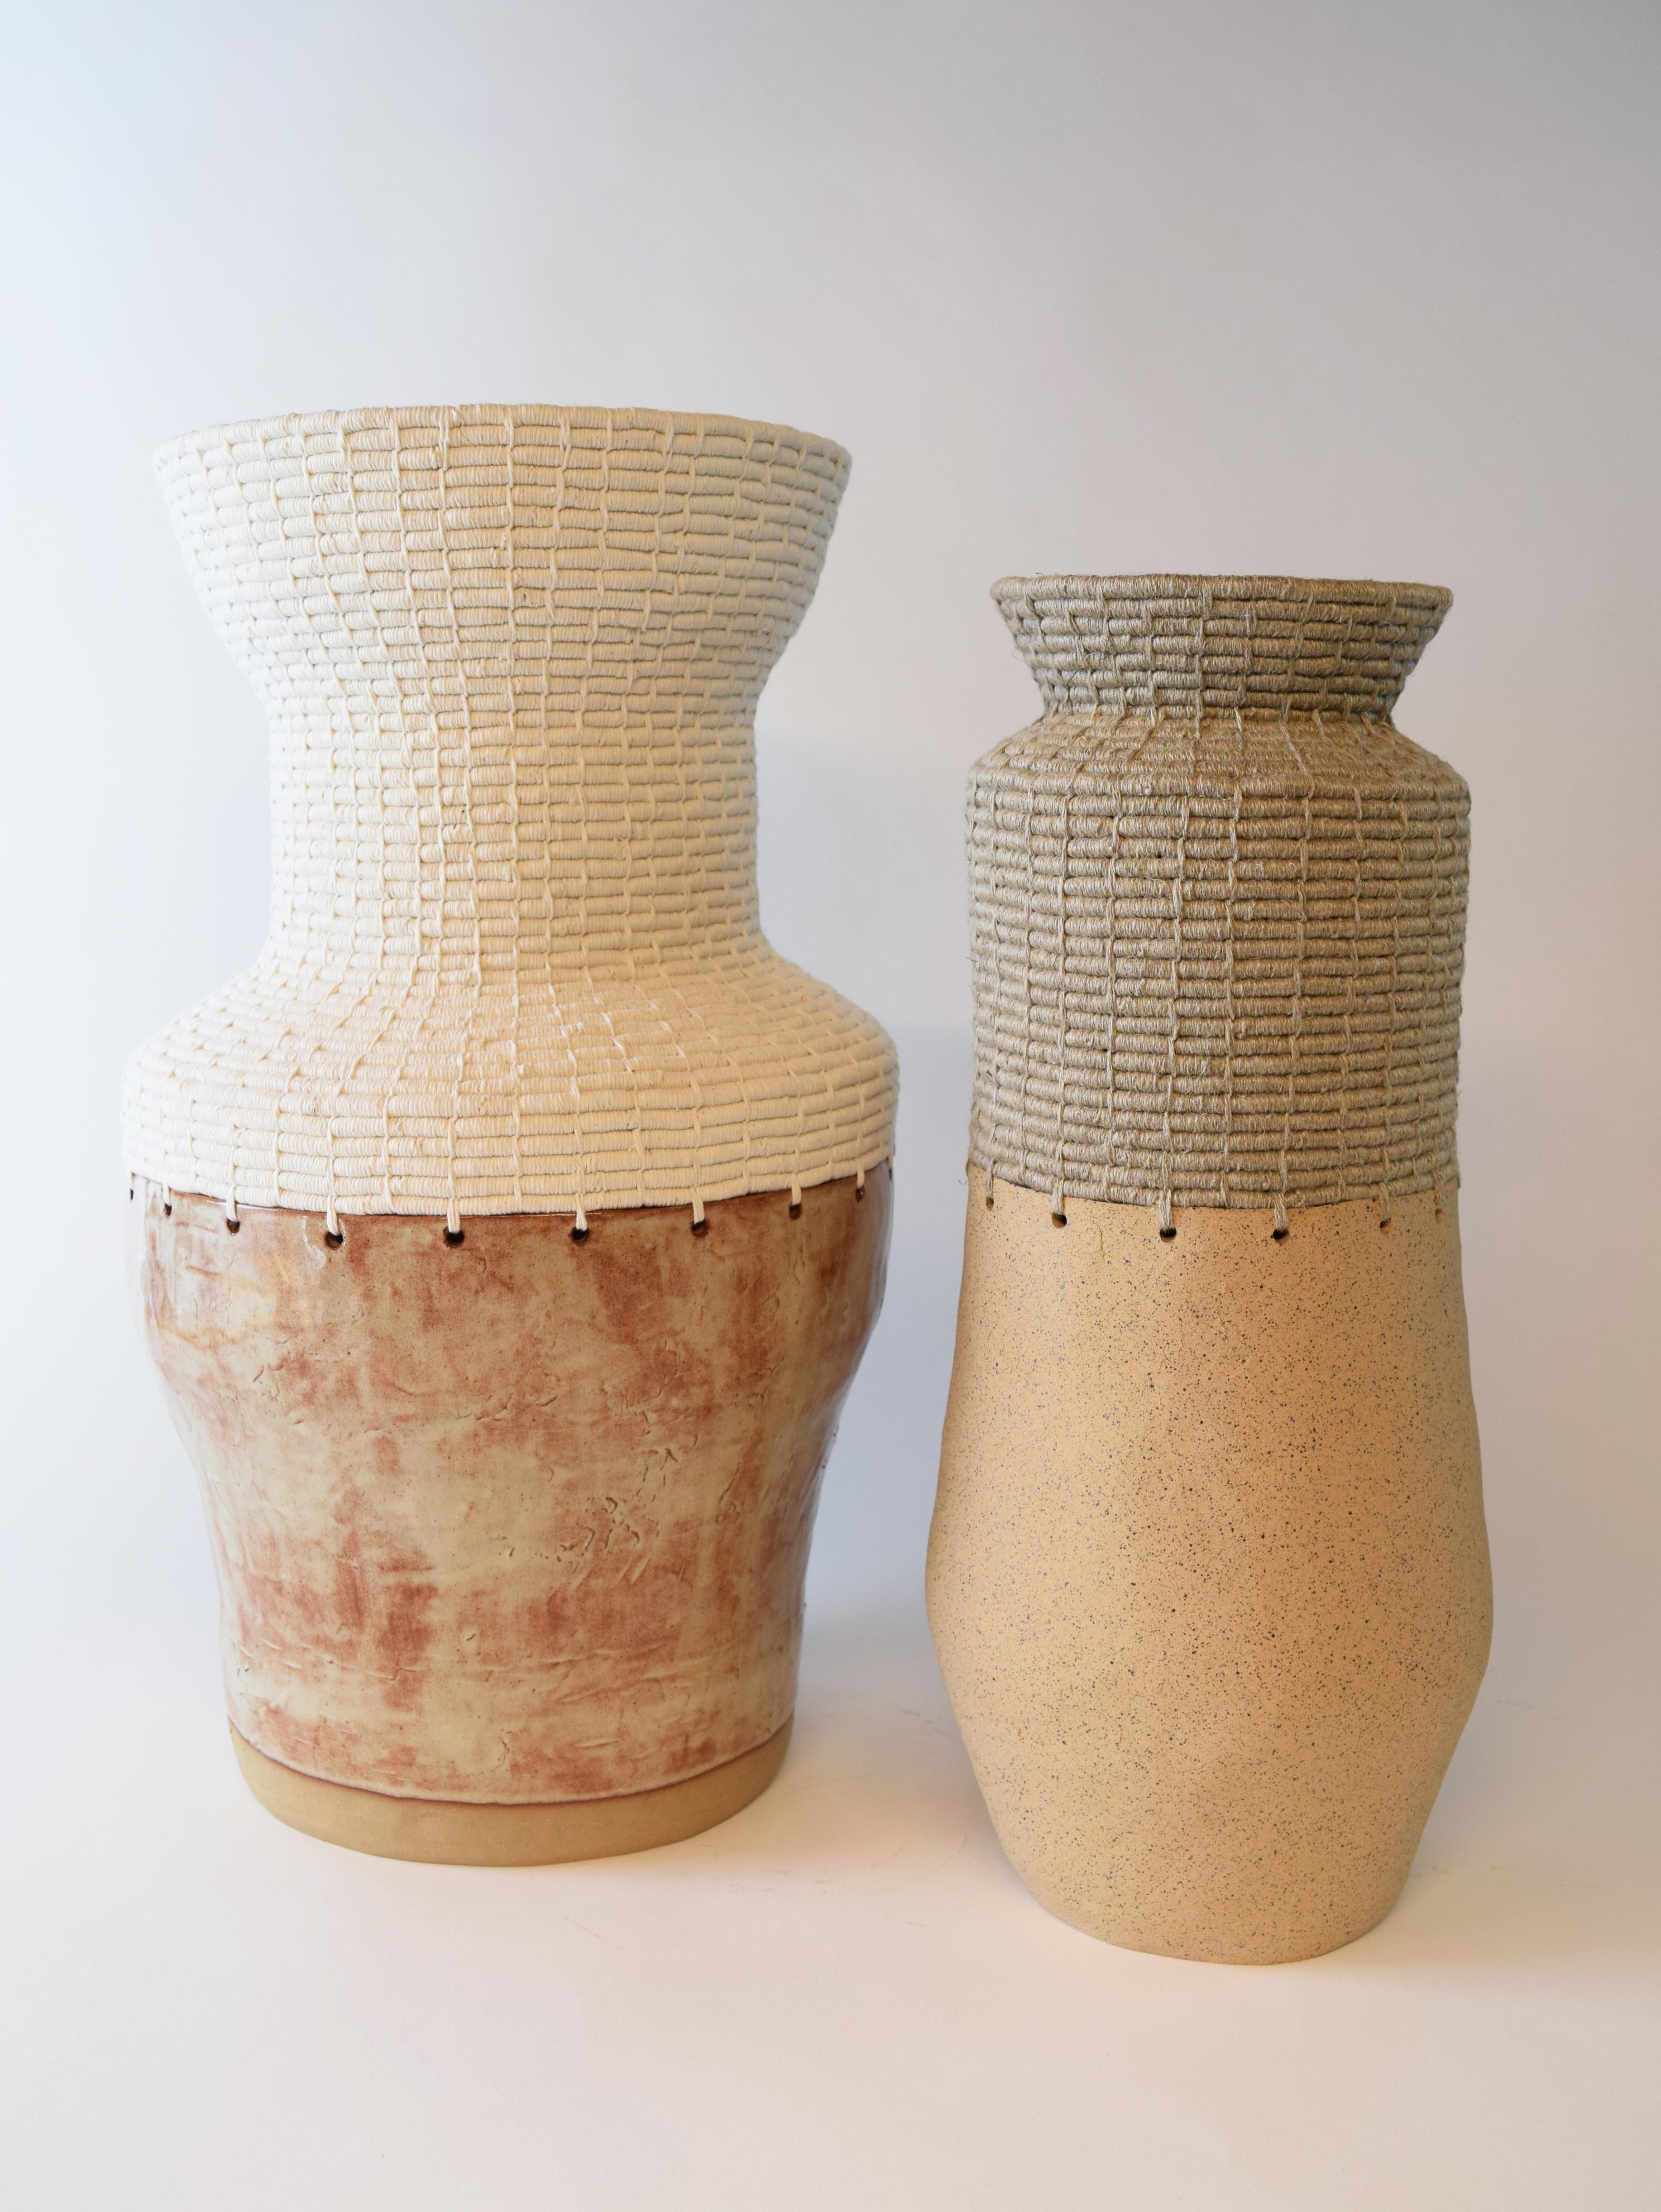 Hand-Crafted One of a Kind Ceramic & Fiber Vessel #763 - Speckled Clay, Woven Natural Linen